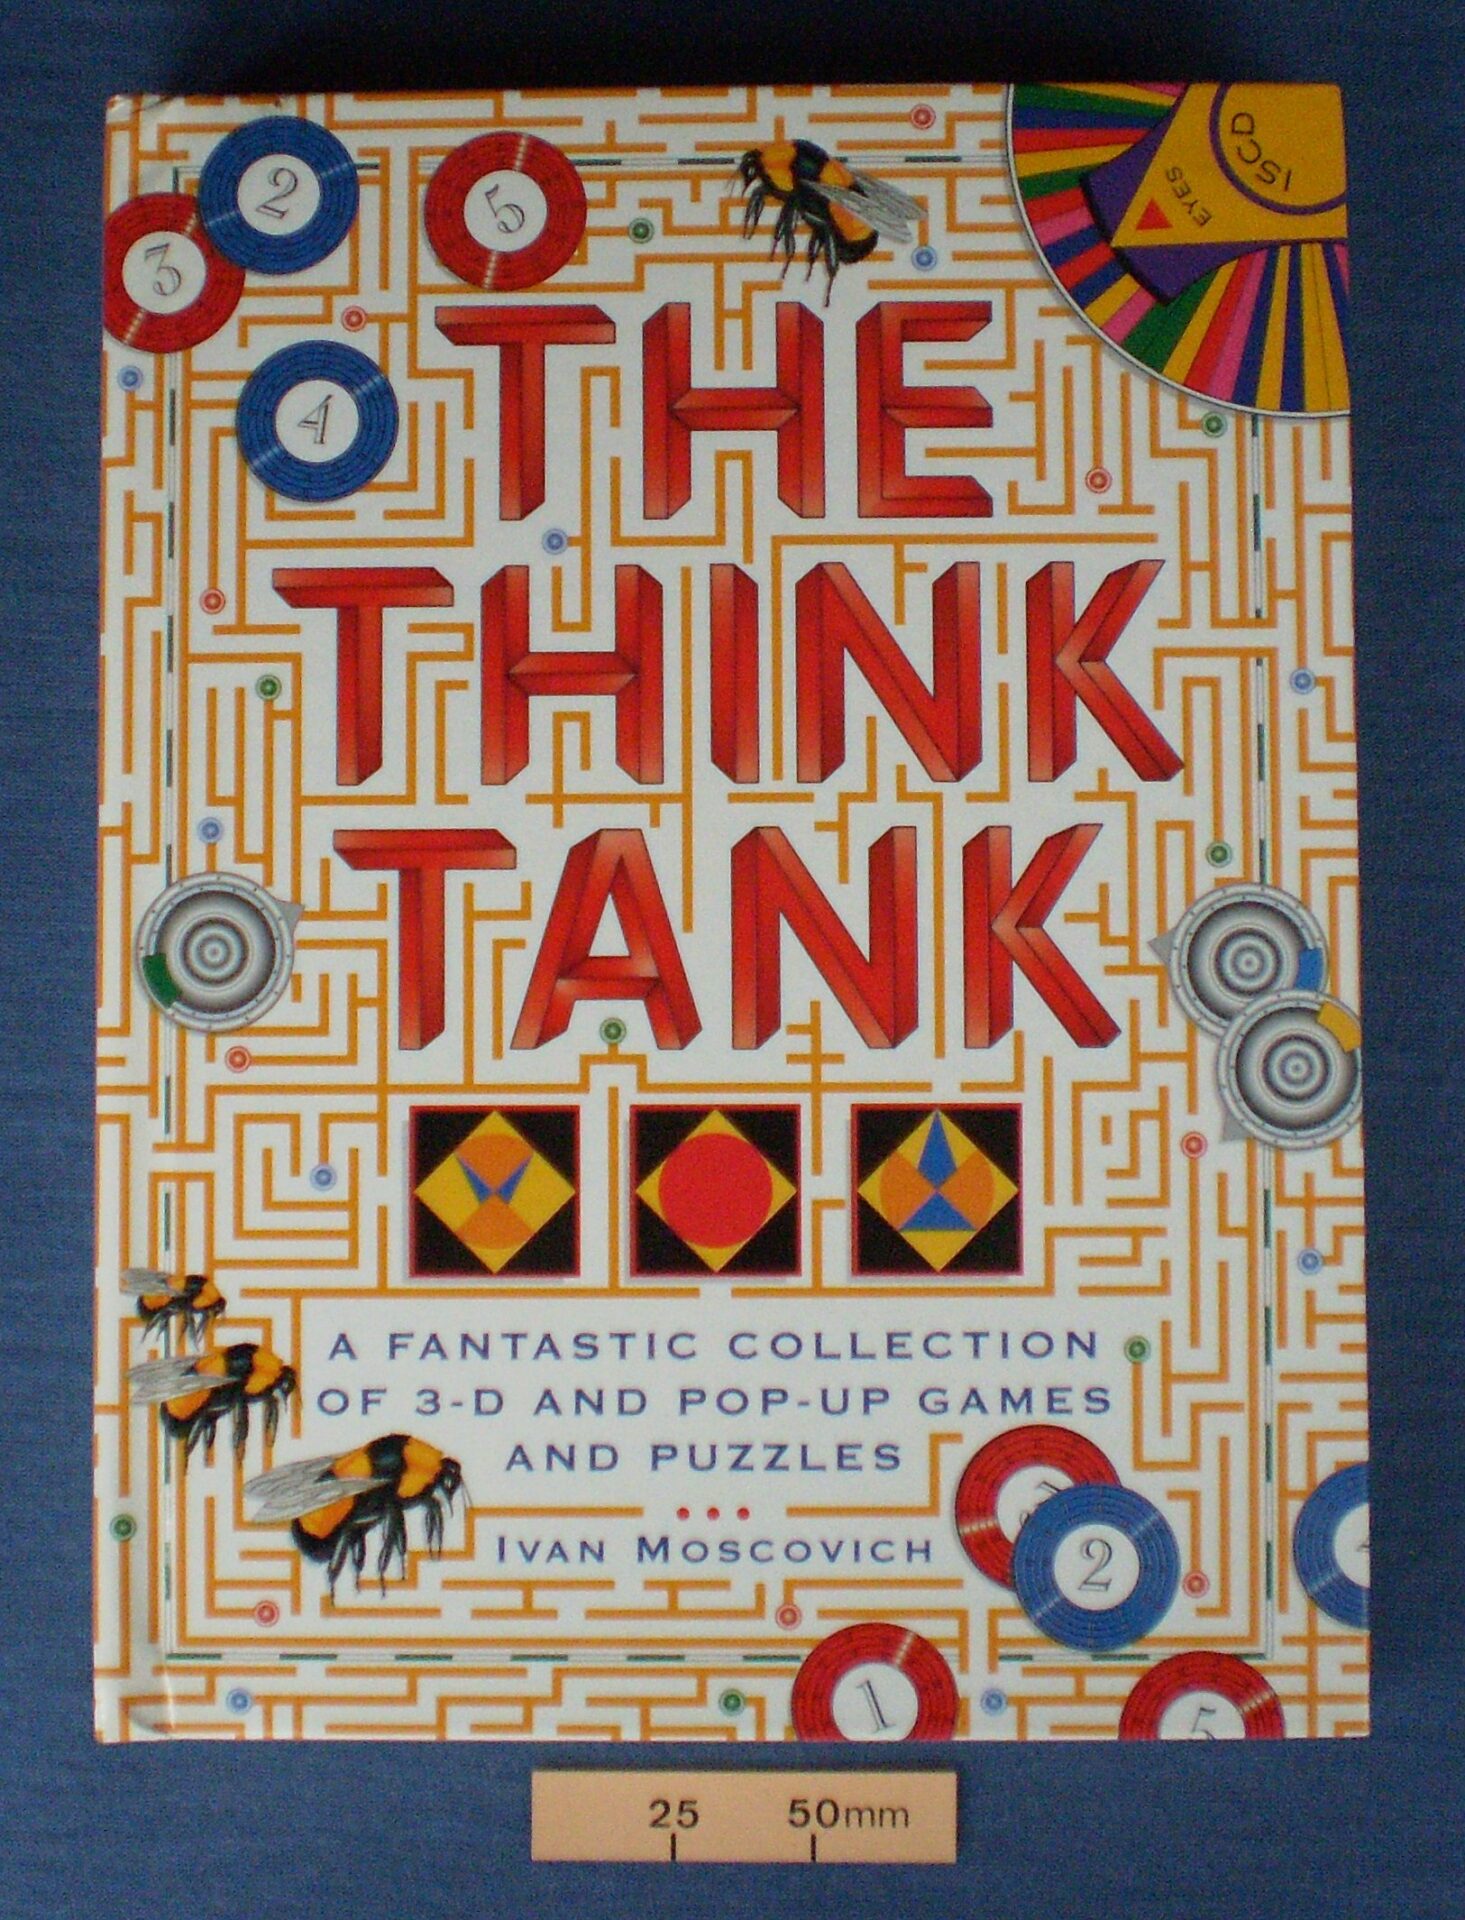 ‘The Think Tank’ by Ivan Moscovich. A collection of 3D and pop-up games and puzzles